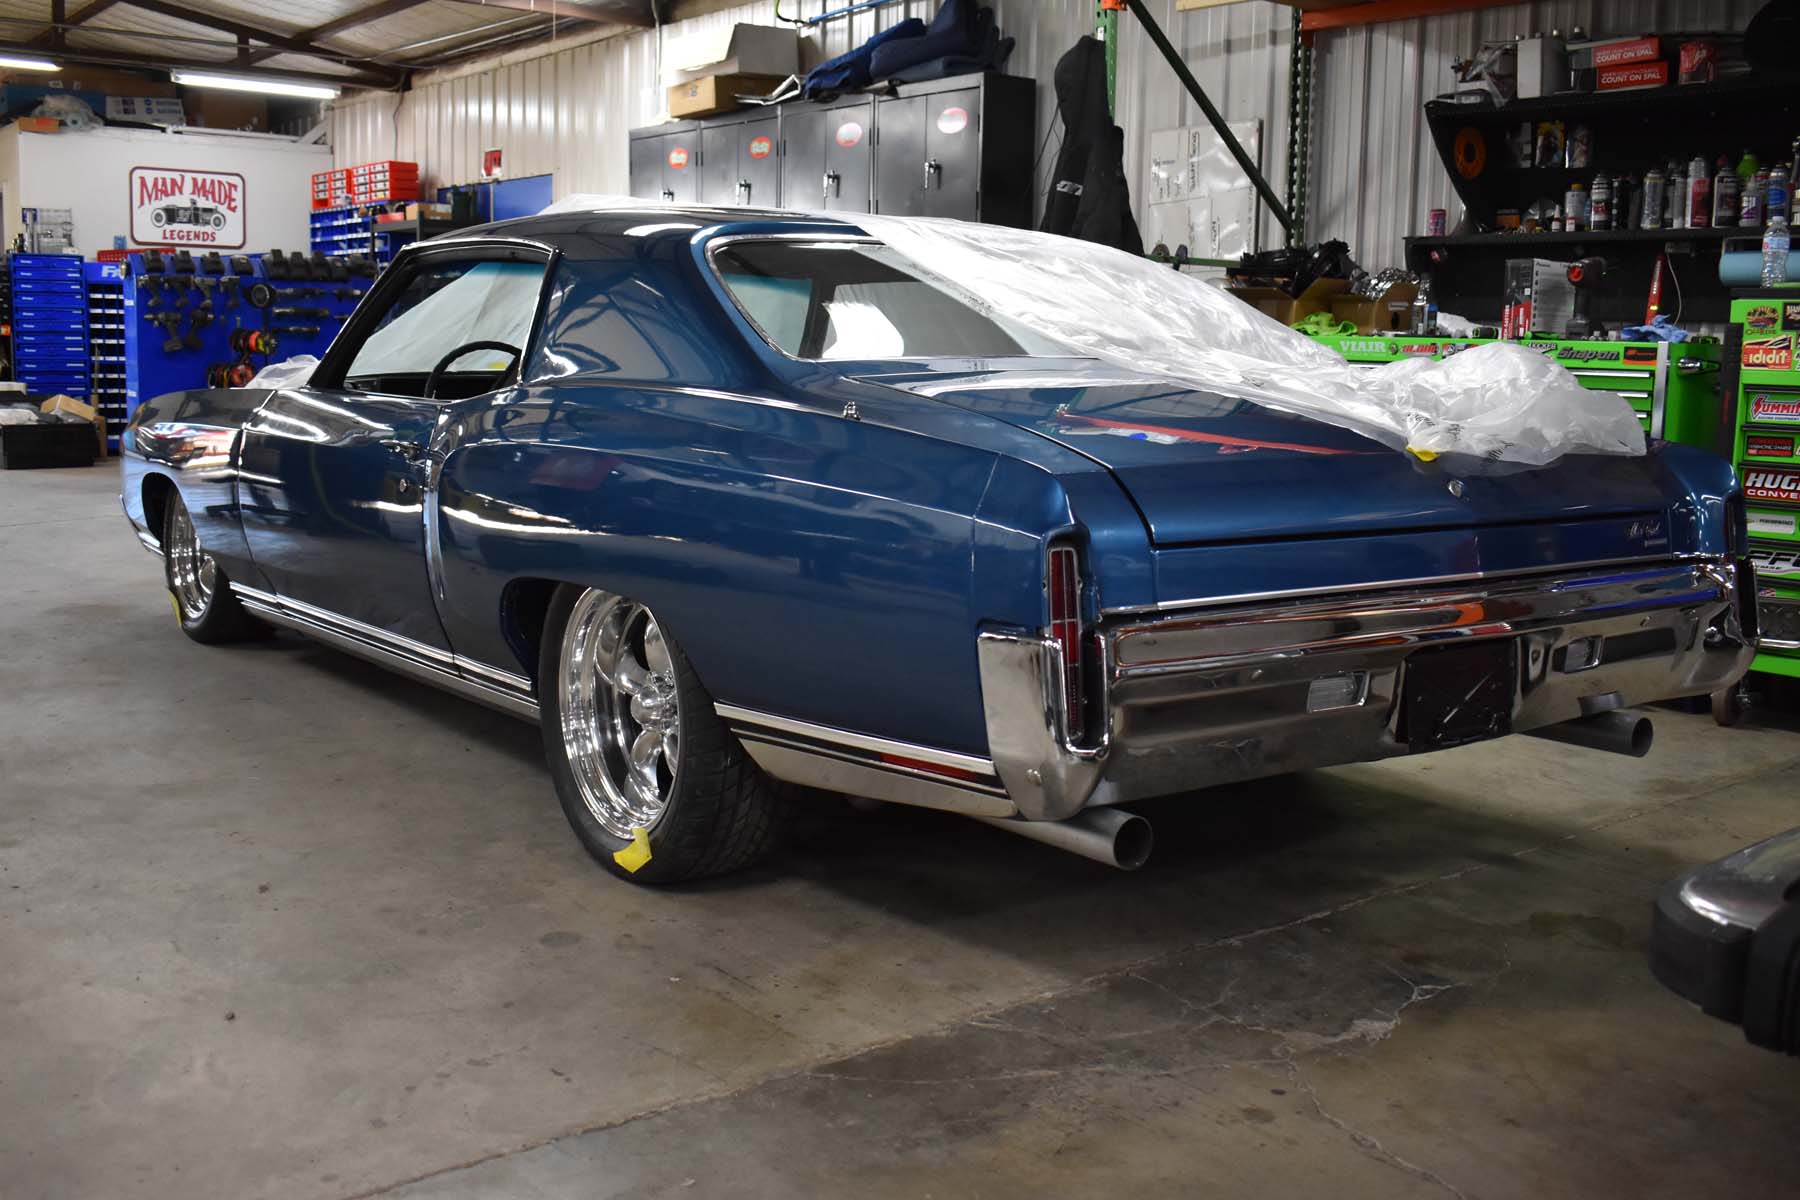 1970 Chevy Monte Carlo Restoration By Man Made Legends